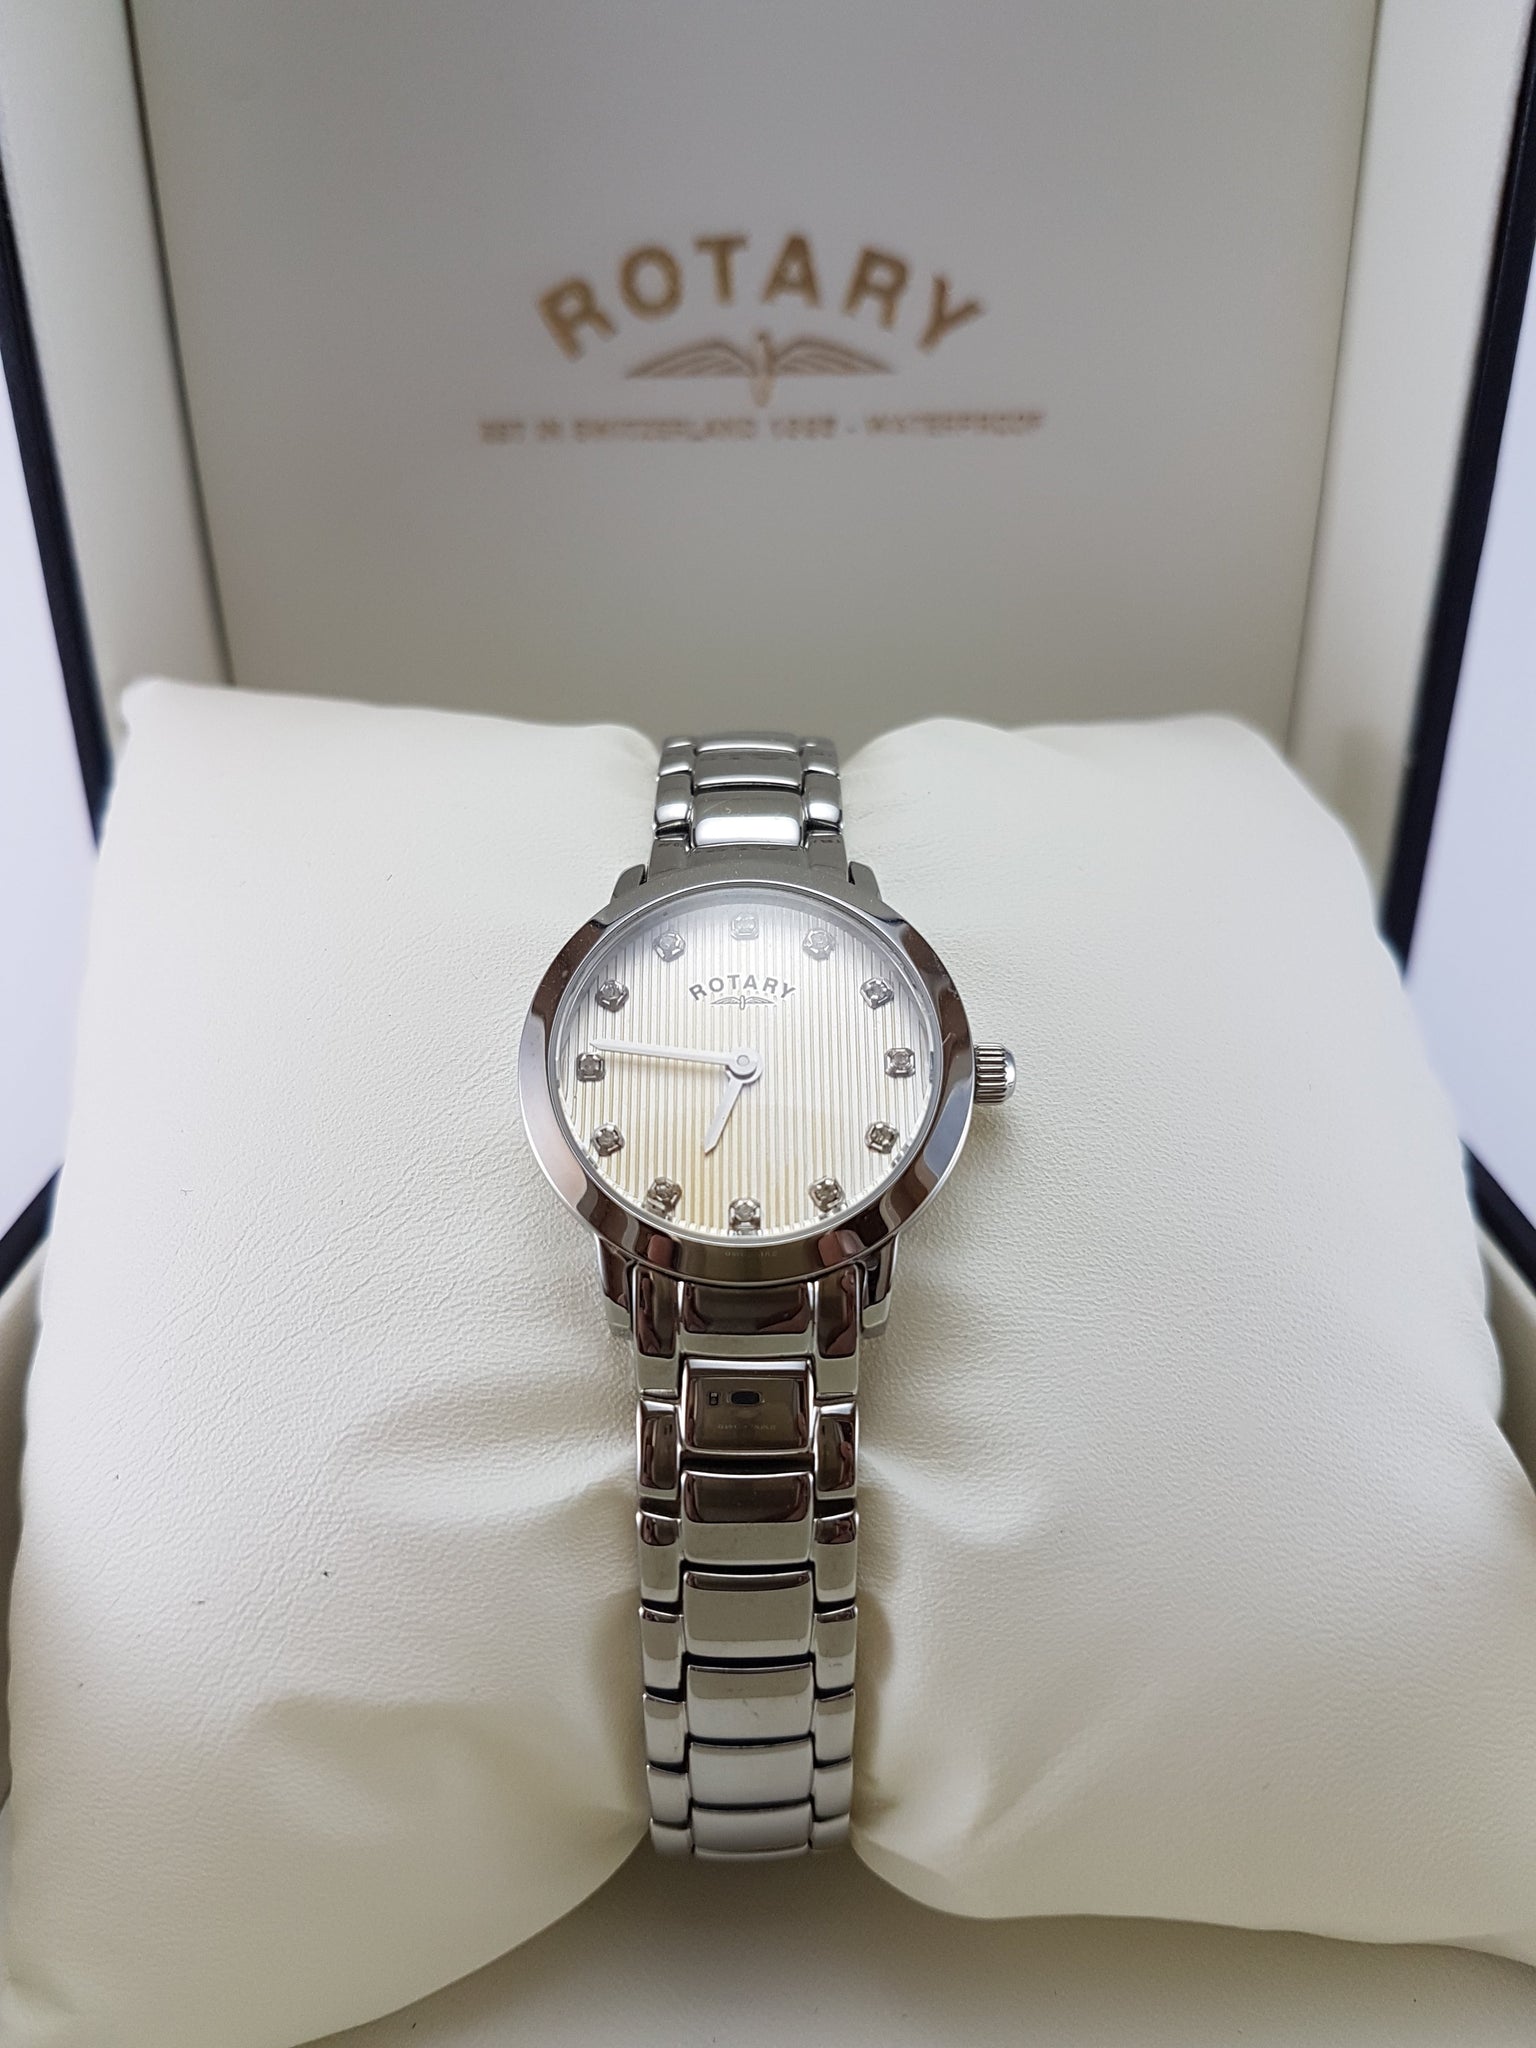 Serial number rotary watch prices